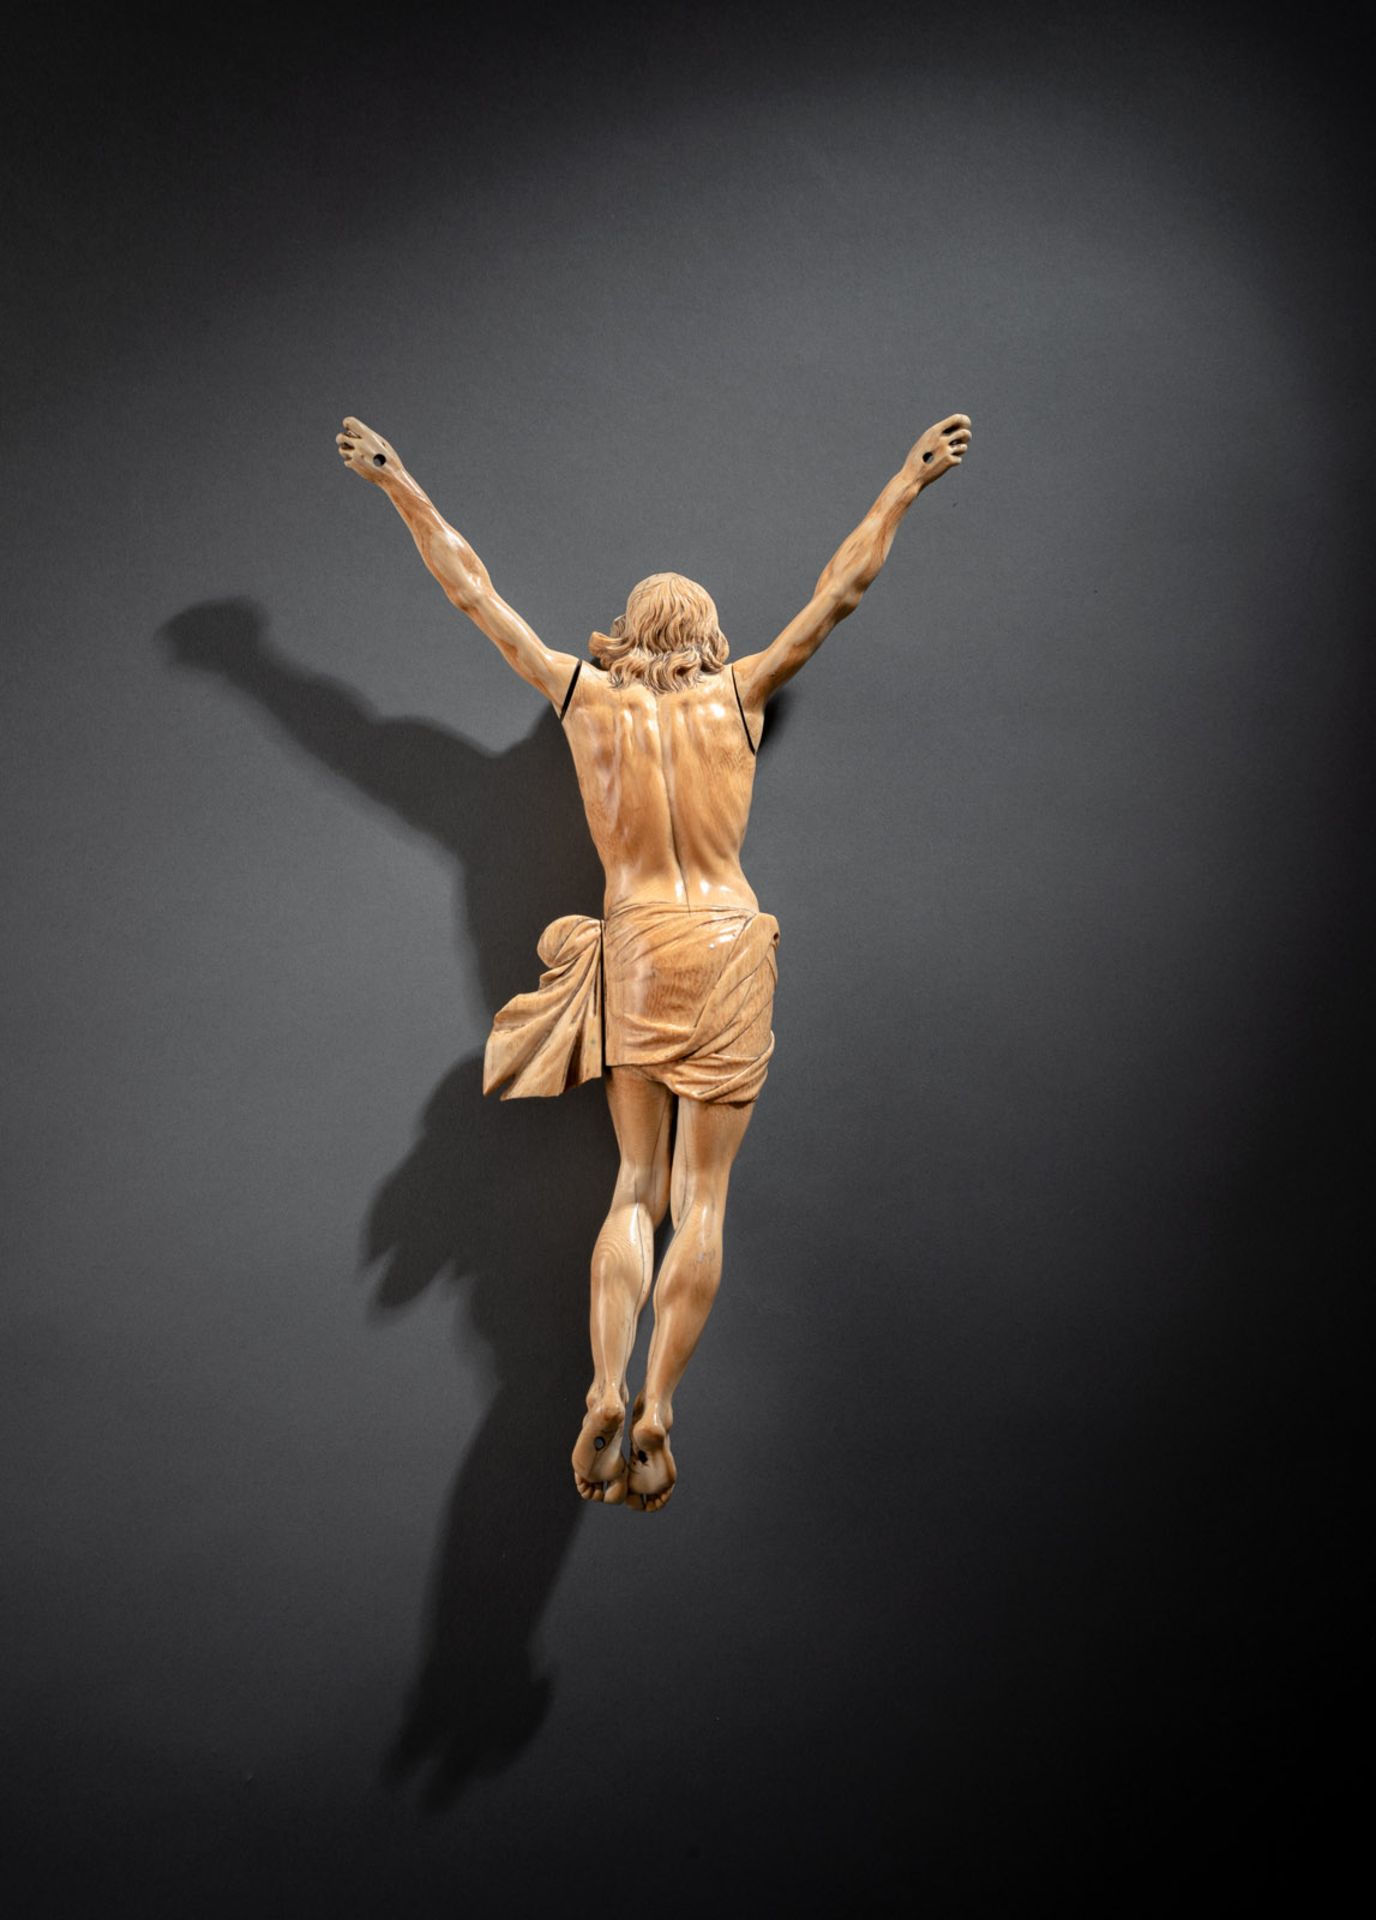 A LARGE AN EXPRESSIVE BAROQUE IVORY BODY OF CHRIST - Image 3 of 3